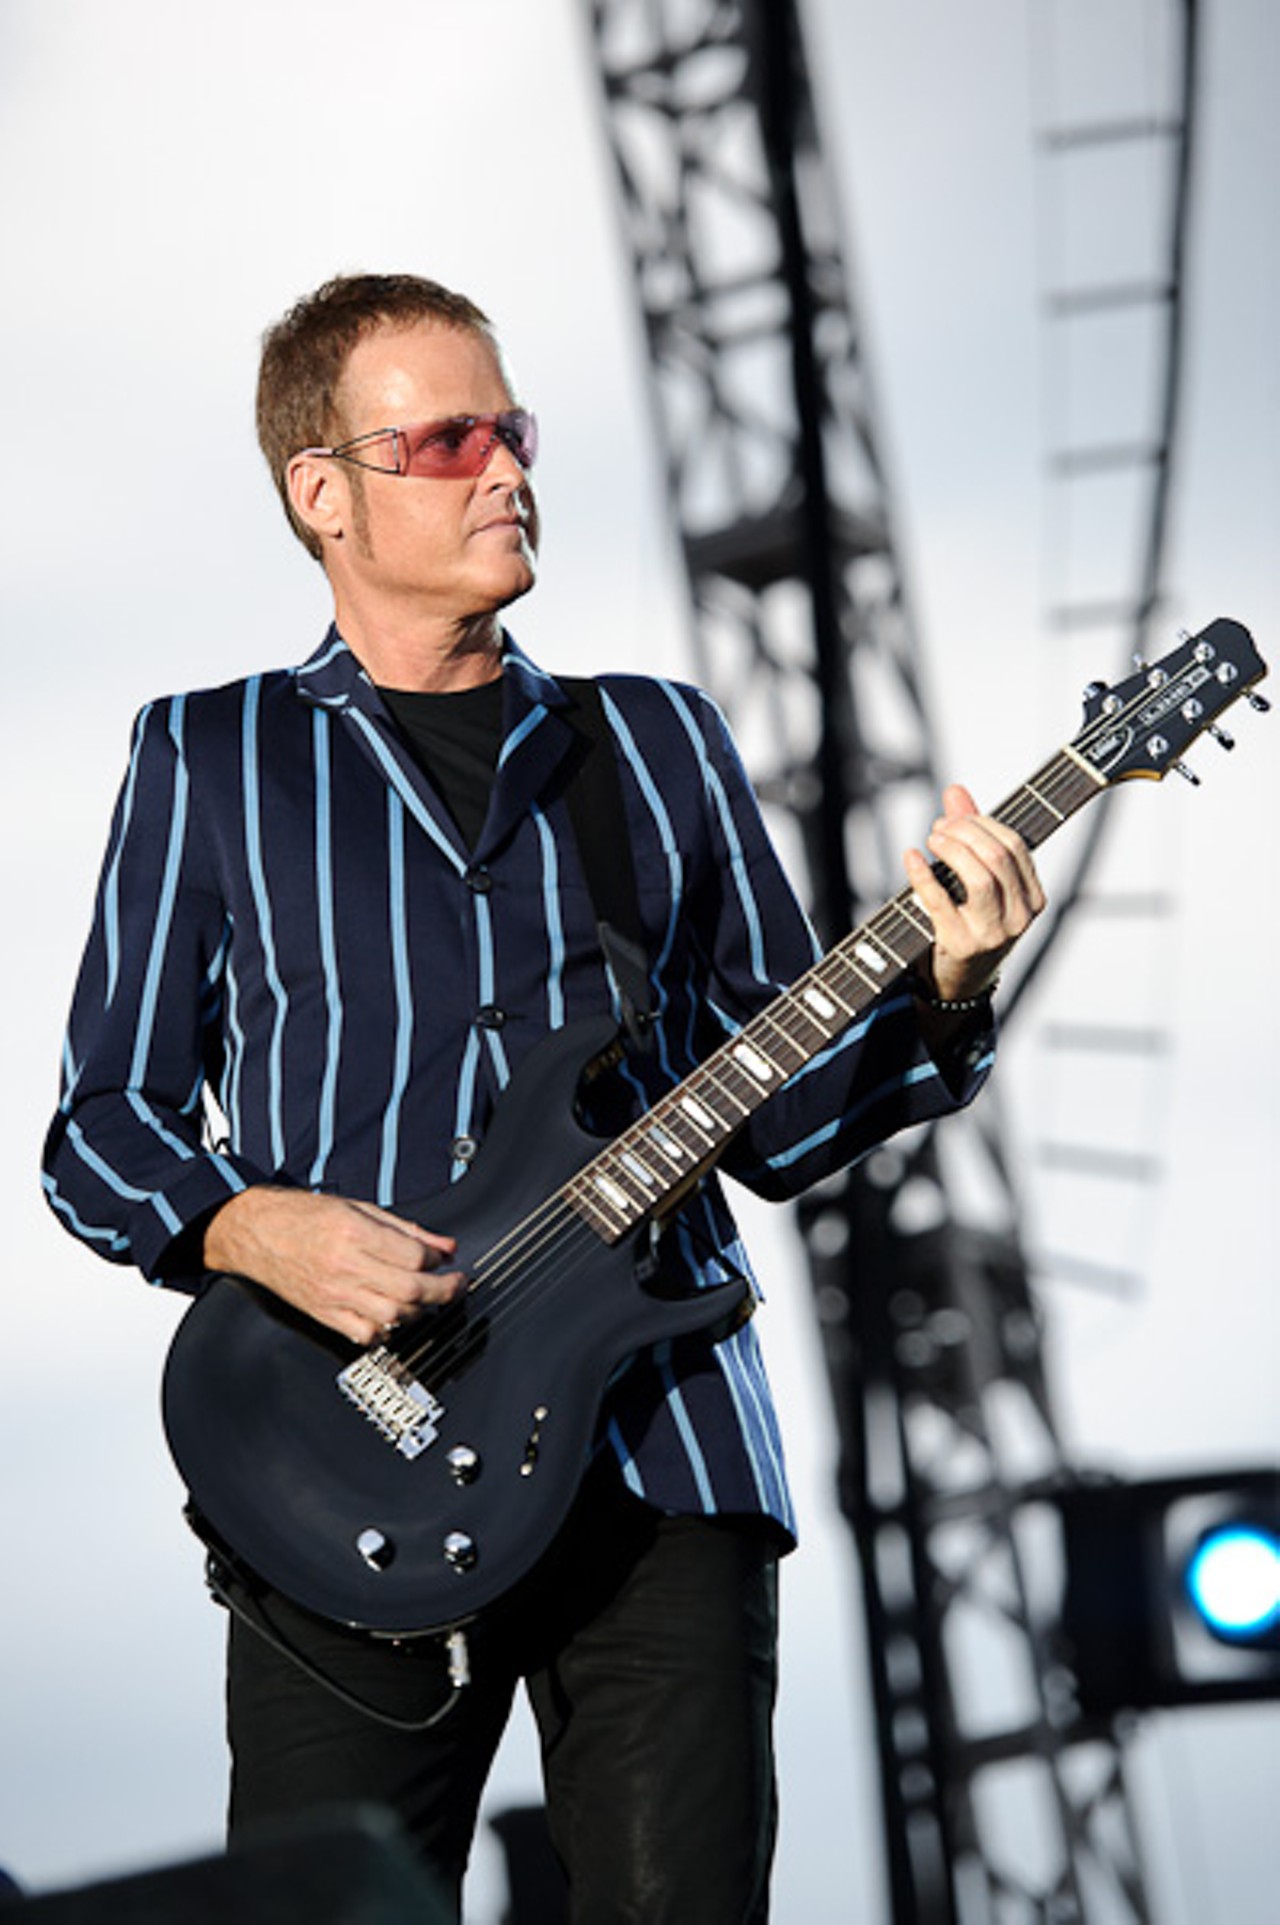 Keith Strickland of The B-52s, performing at the Gateway Arch in St. Louis.